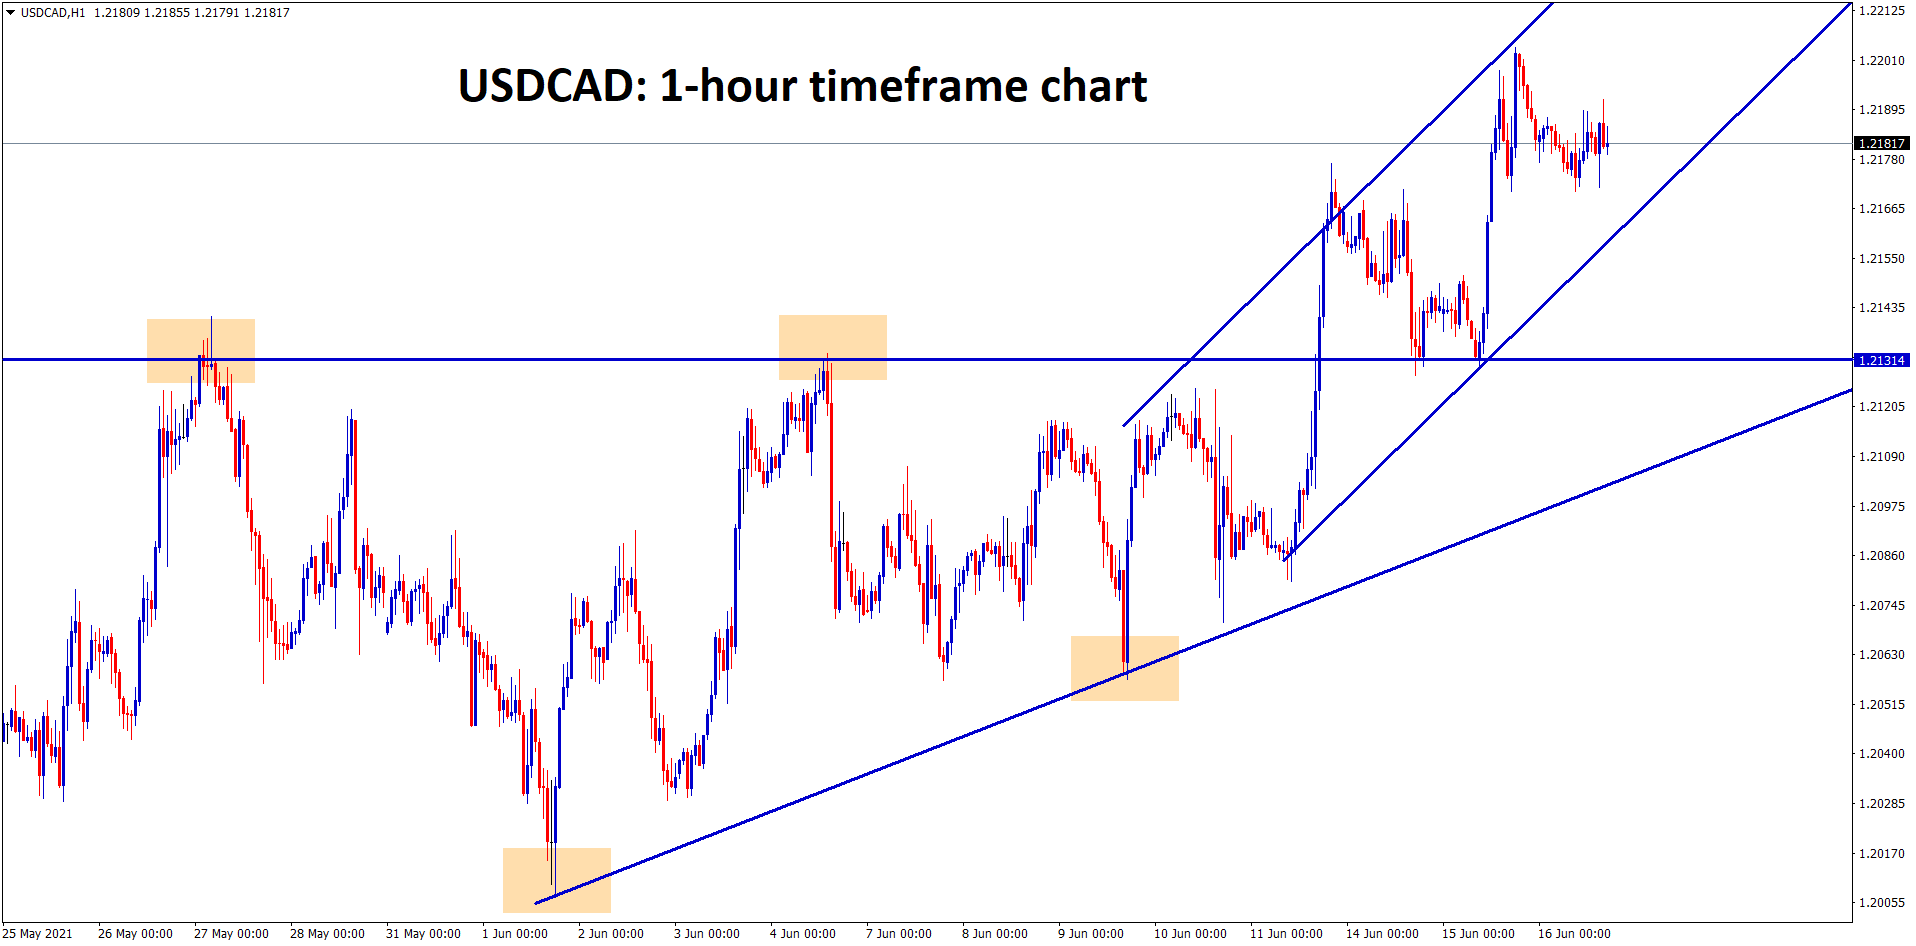 USDCAD after breaking the Ascending Triangle top is moving now between the ascending channel range